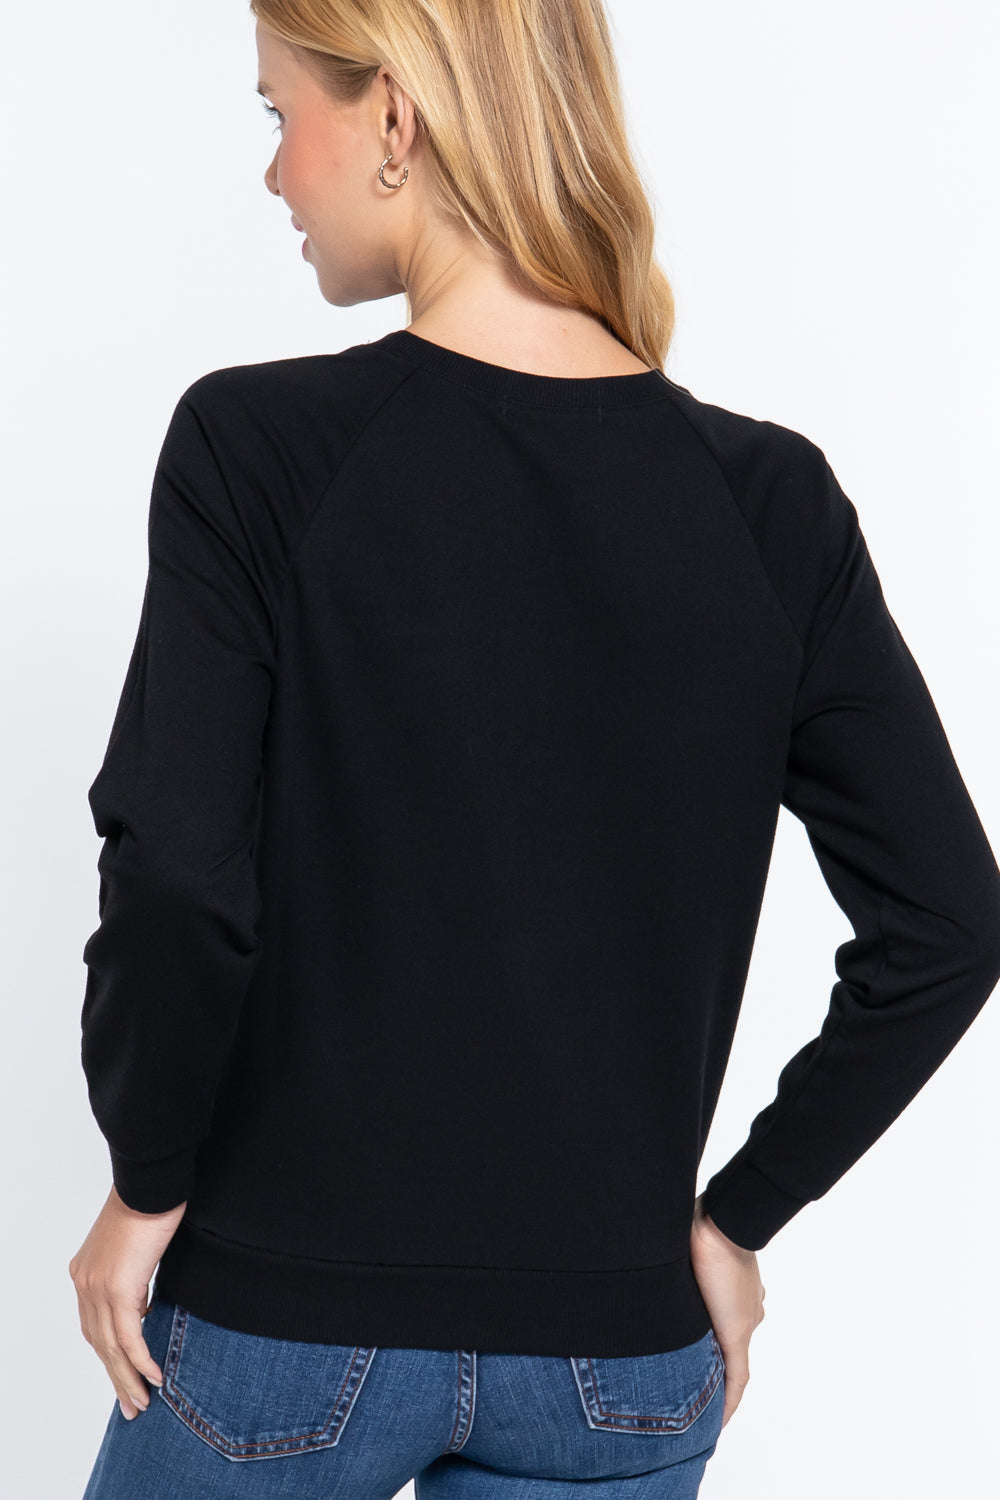 Sequins French Terry Pullover Top